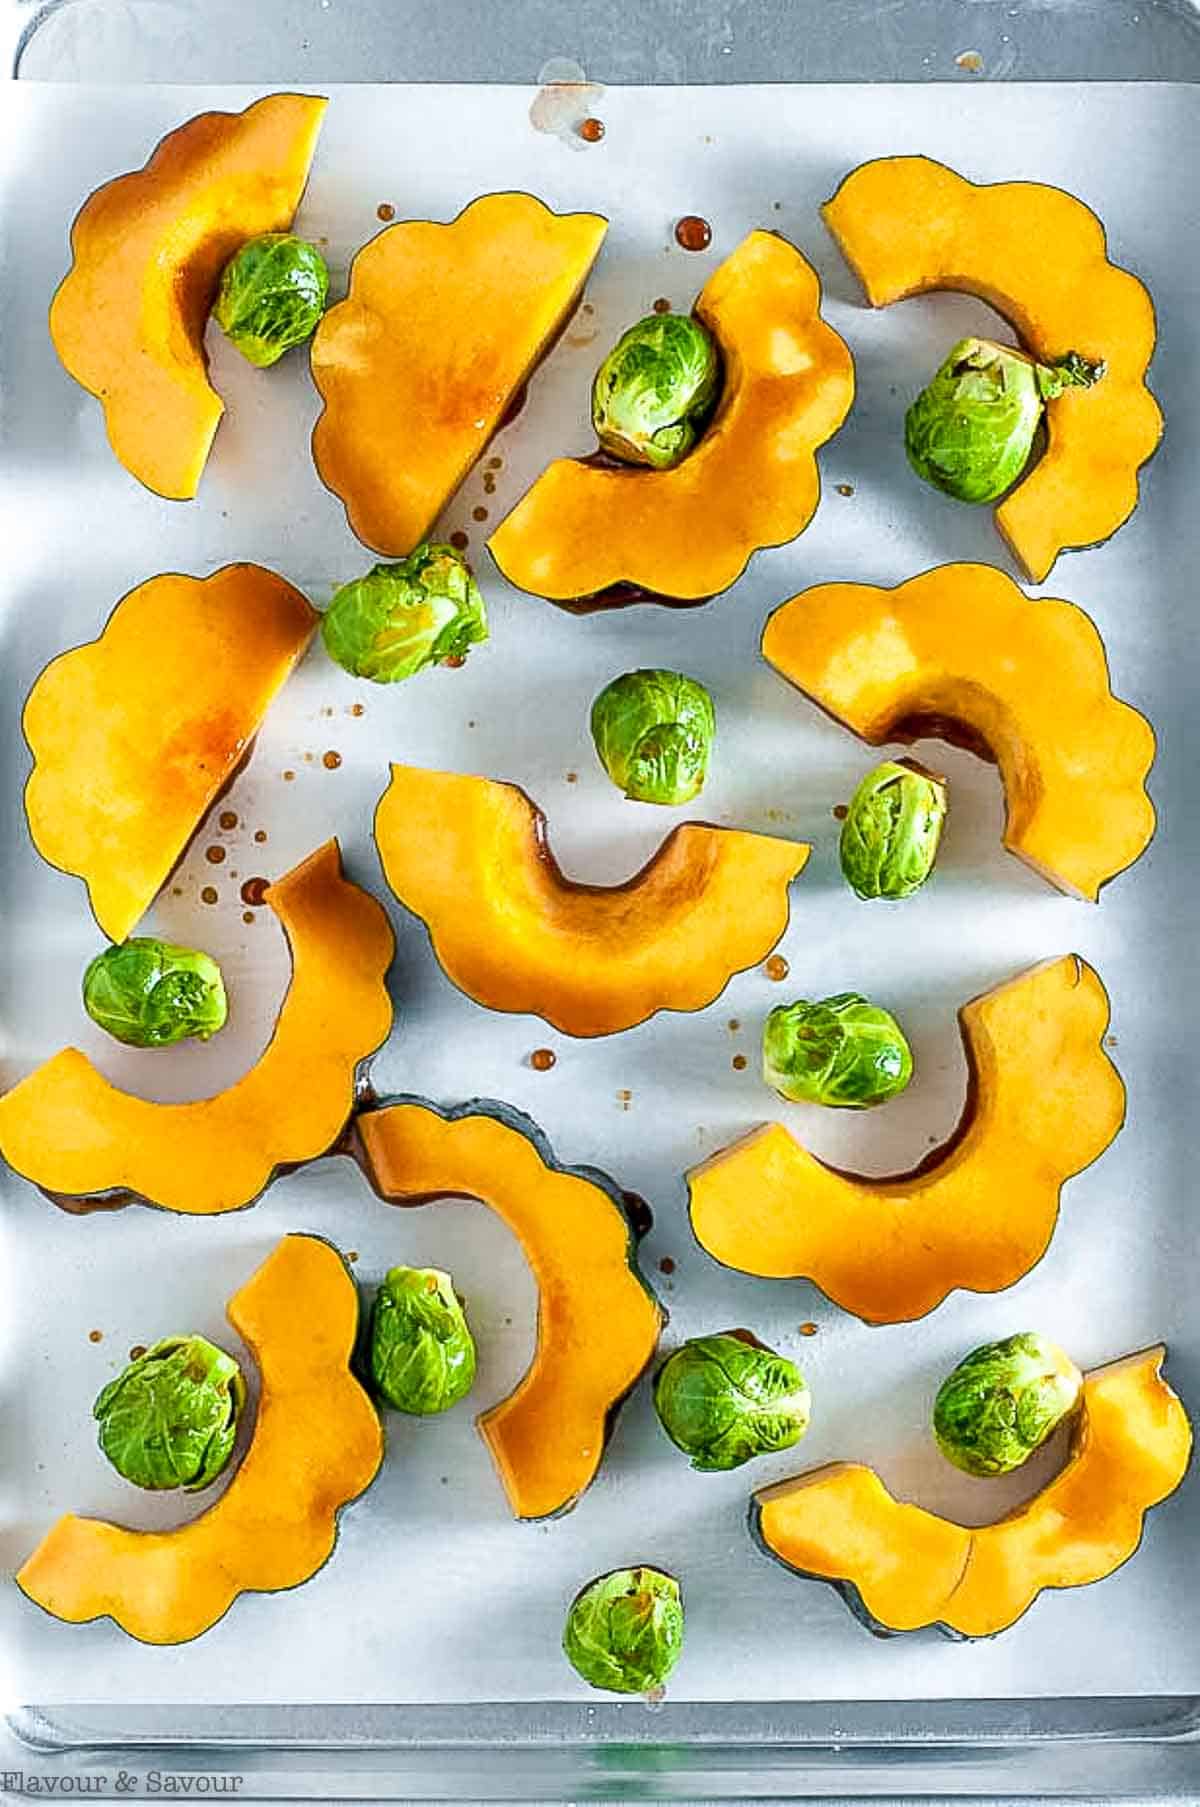 Balsamic acorn squash slices with Brussels sprouts on a baking sheet.